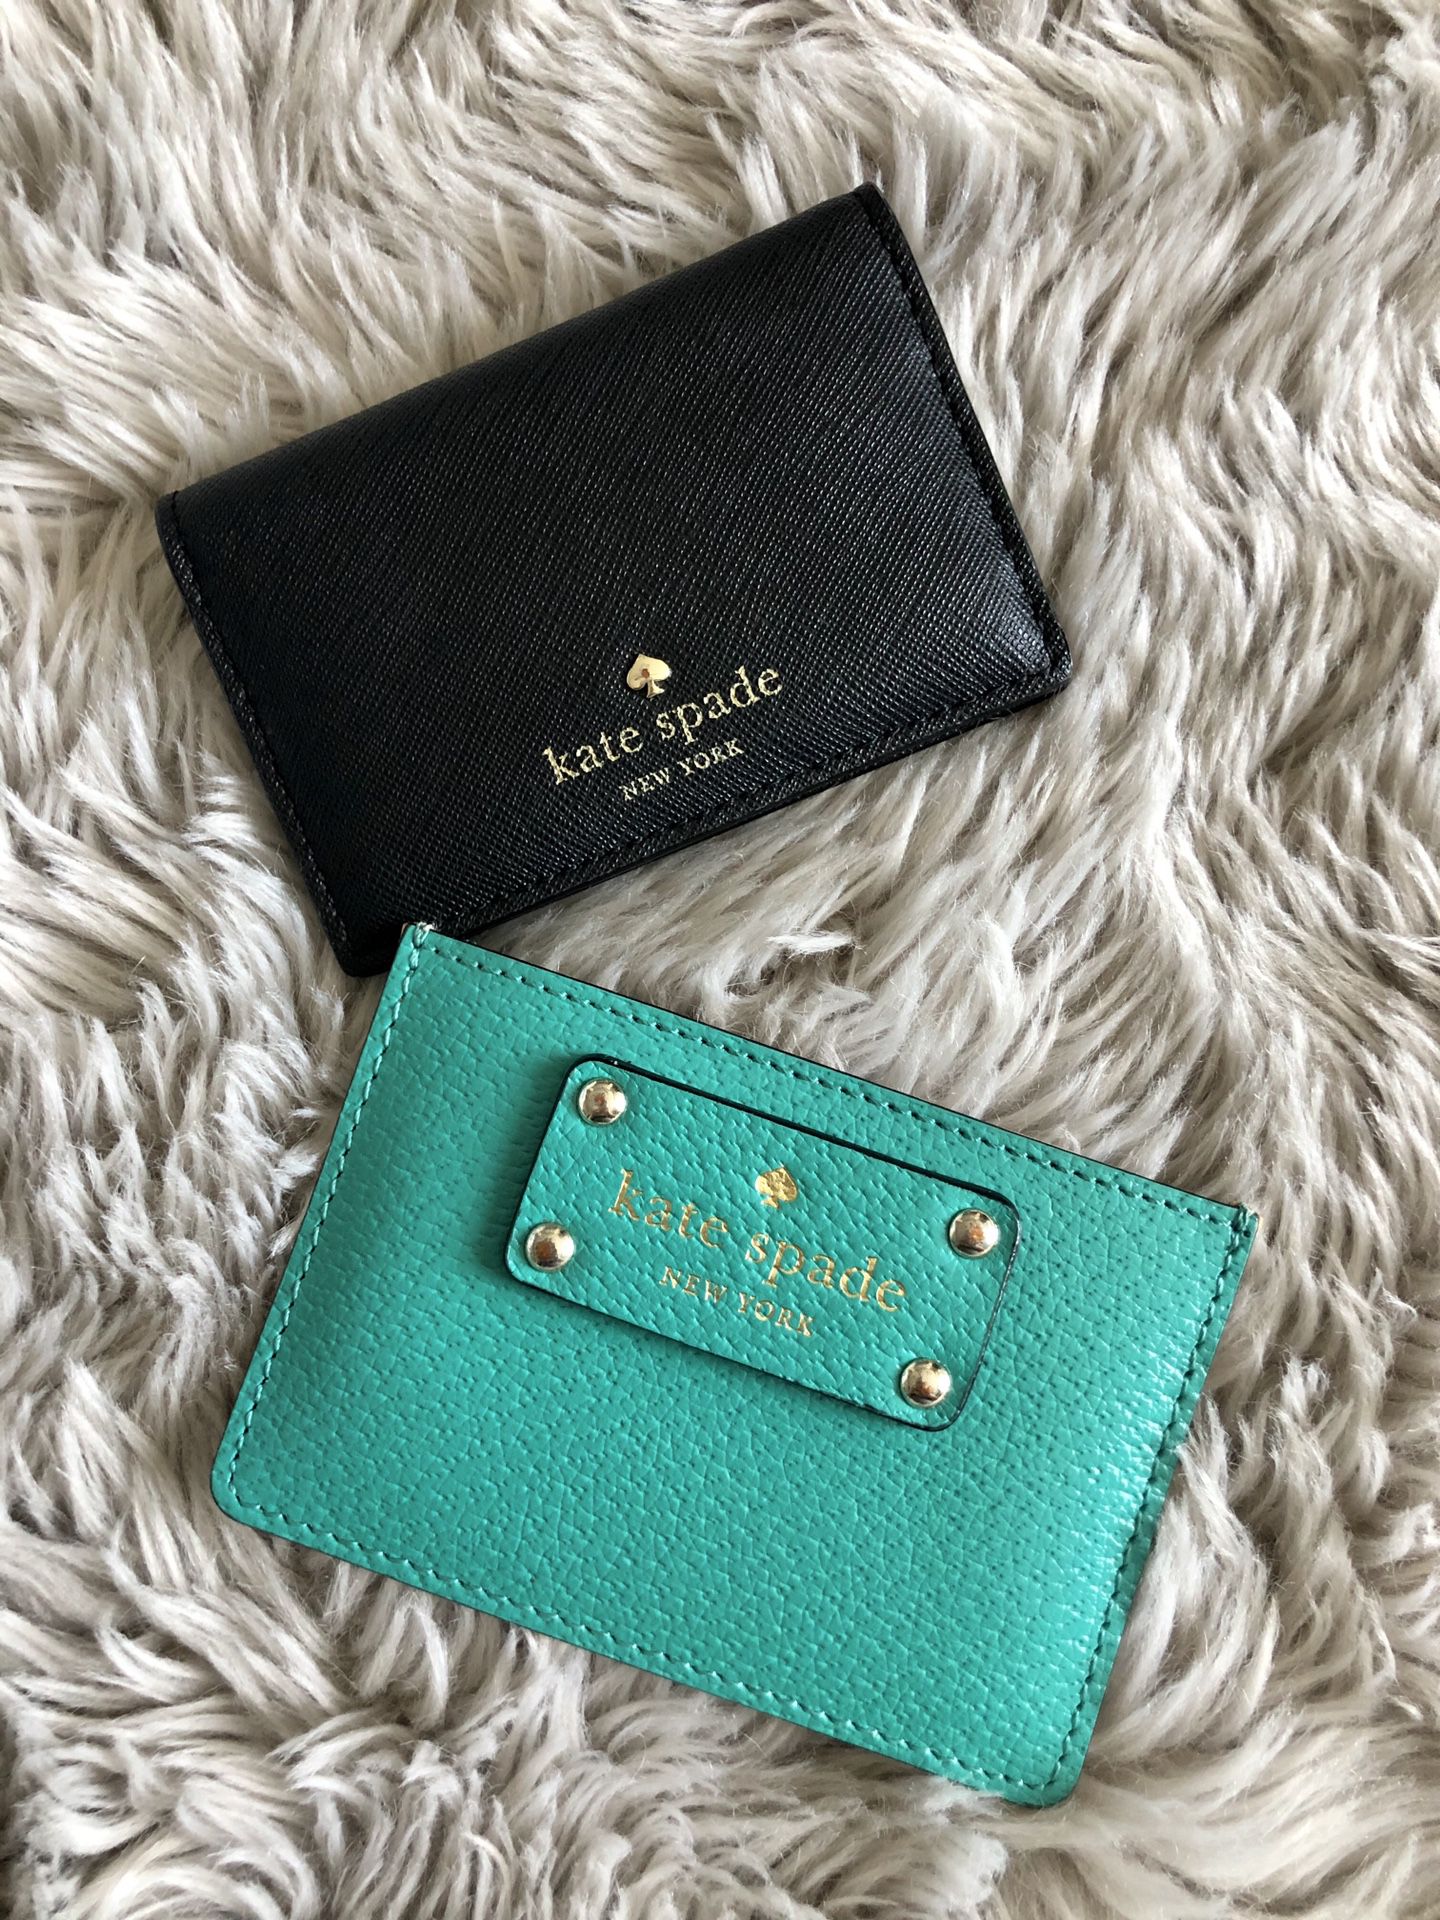 Authentic KATE SPADE Card Wallets worth $68 for one (Both for $45 or one for $25)